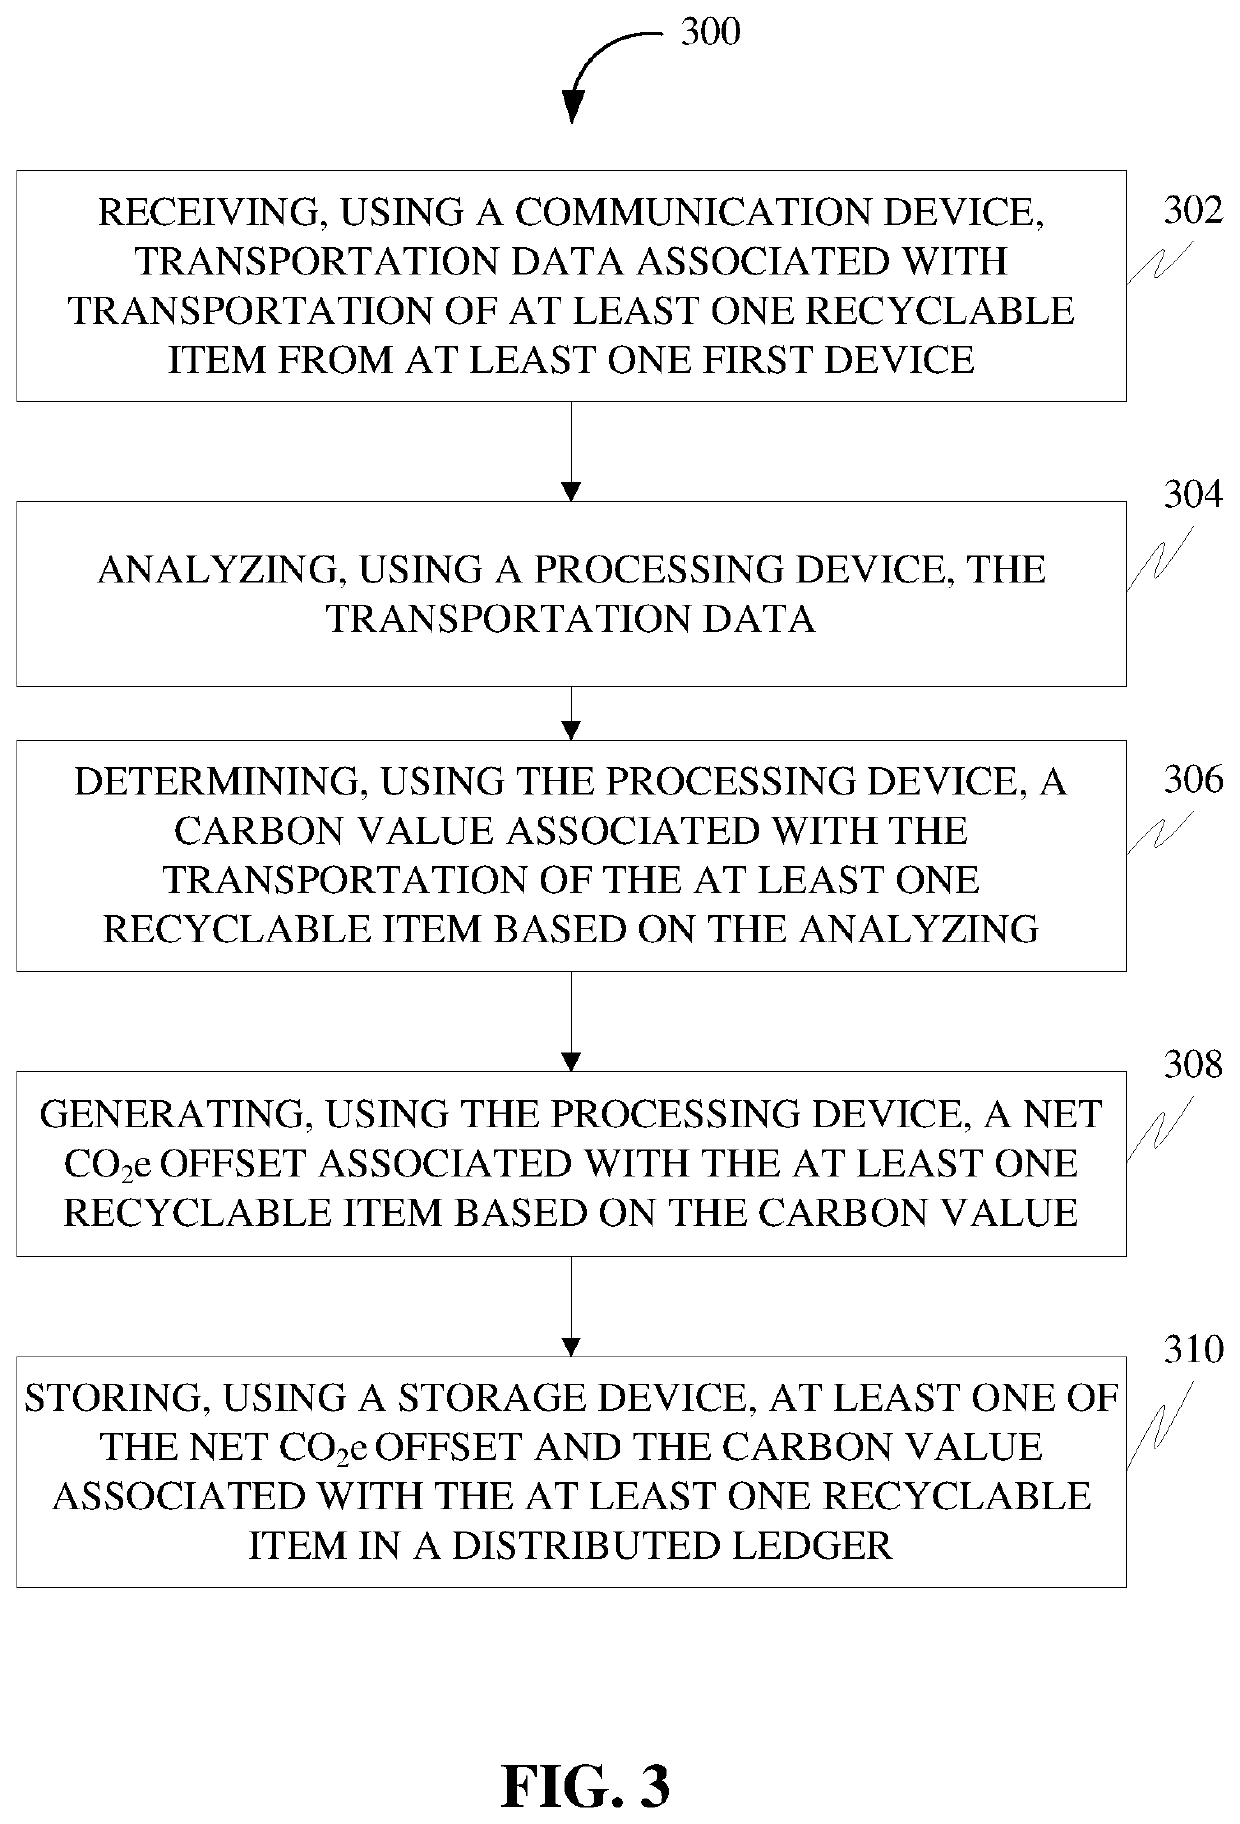 Systems and methods for facilitating generation of a carbon offset based on processing of a recyclable item